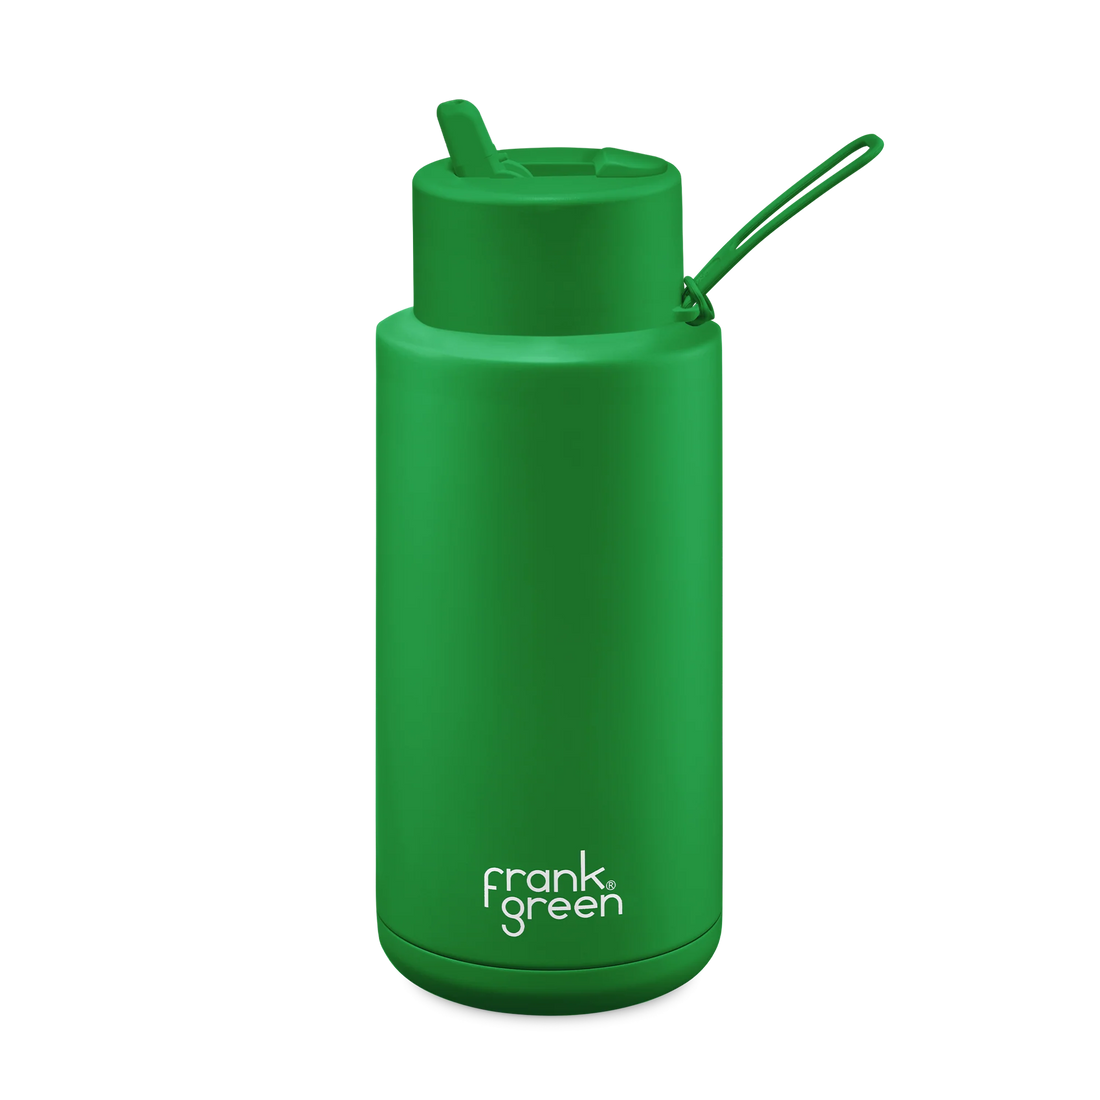 Frank Green Stainless Steel Ceramic Reusable Bottle Evergreen With Straw And Strap 34oz/1,000ml